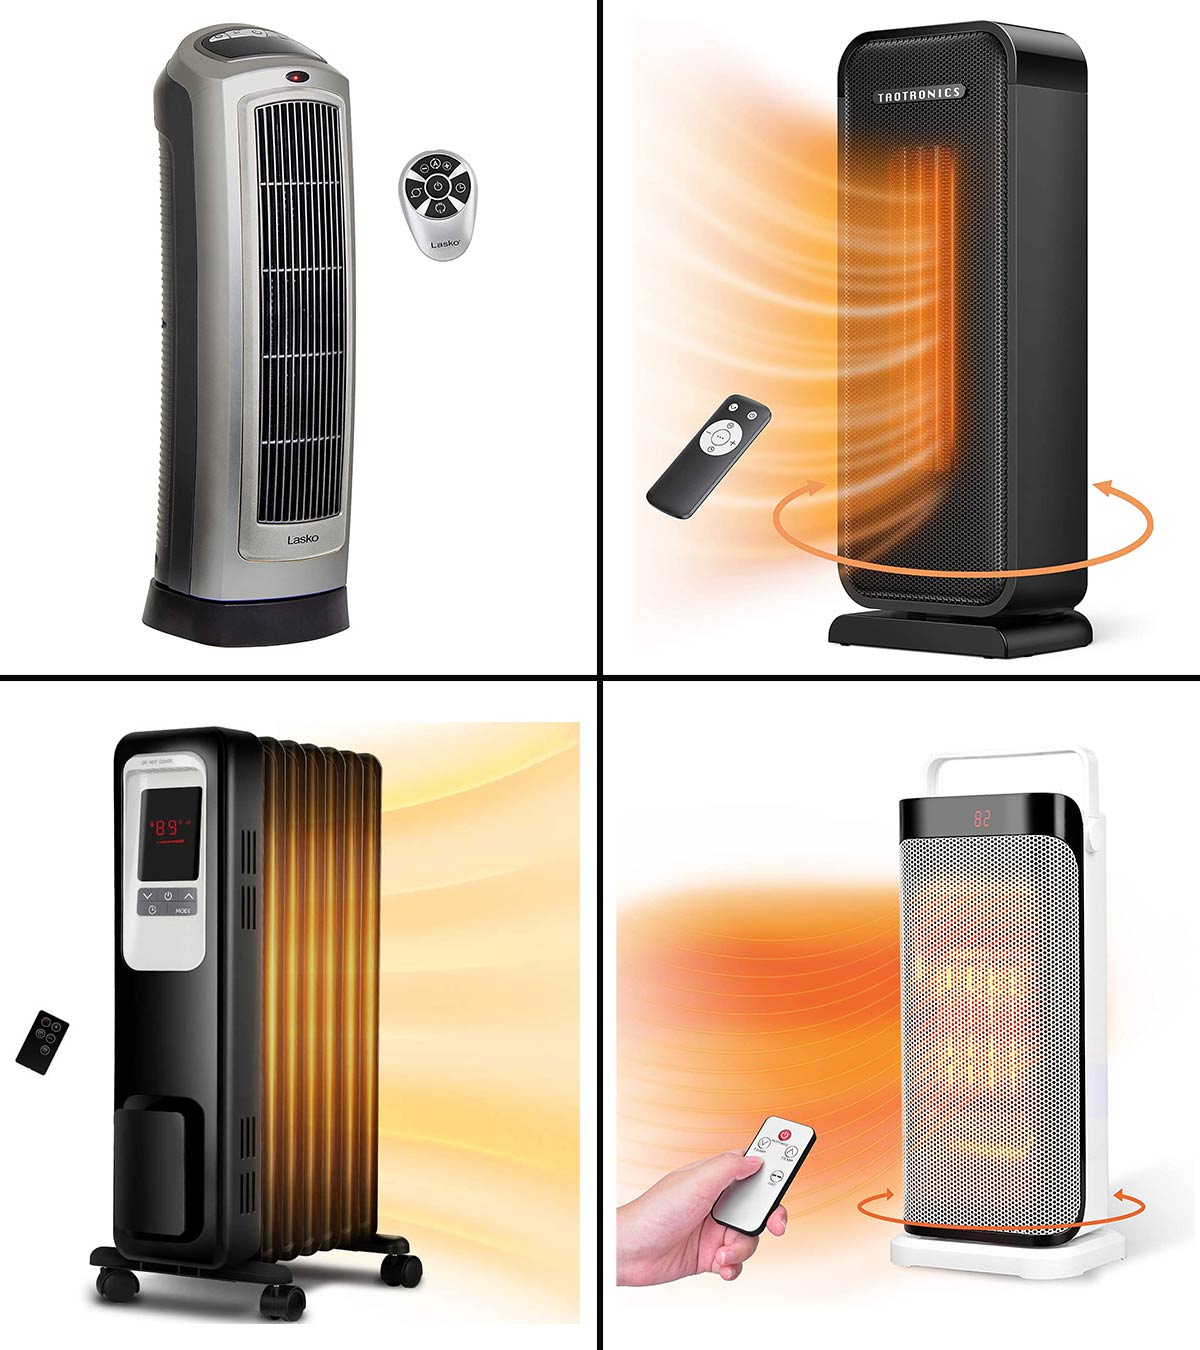 Space heater safety: the safest space heaters for 2022